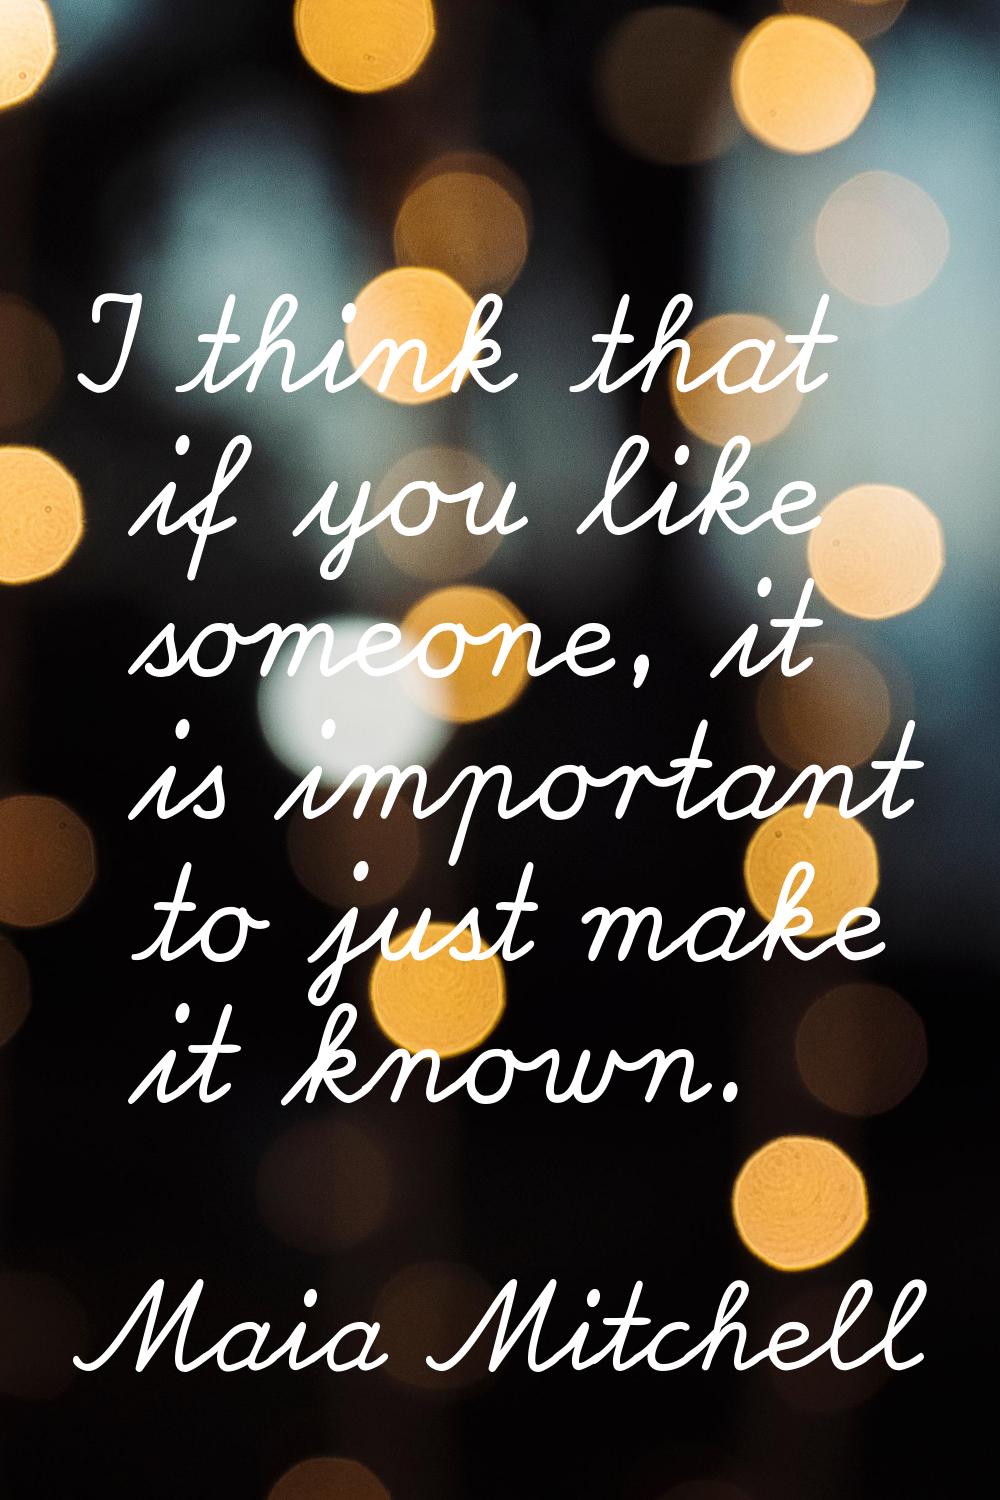 I think that if you like someone, it is important to just make it known.